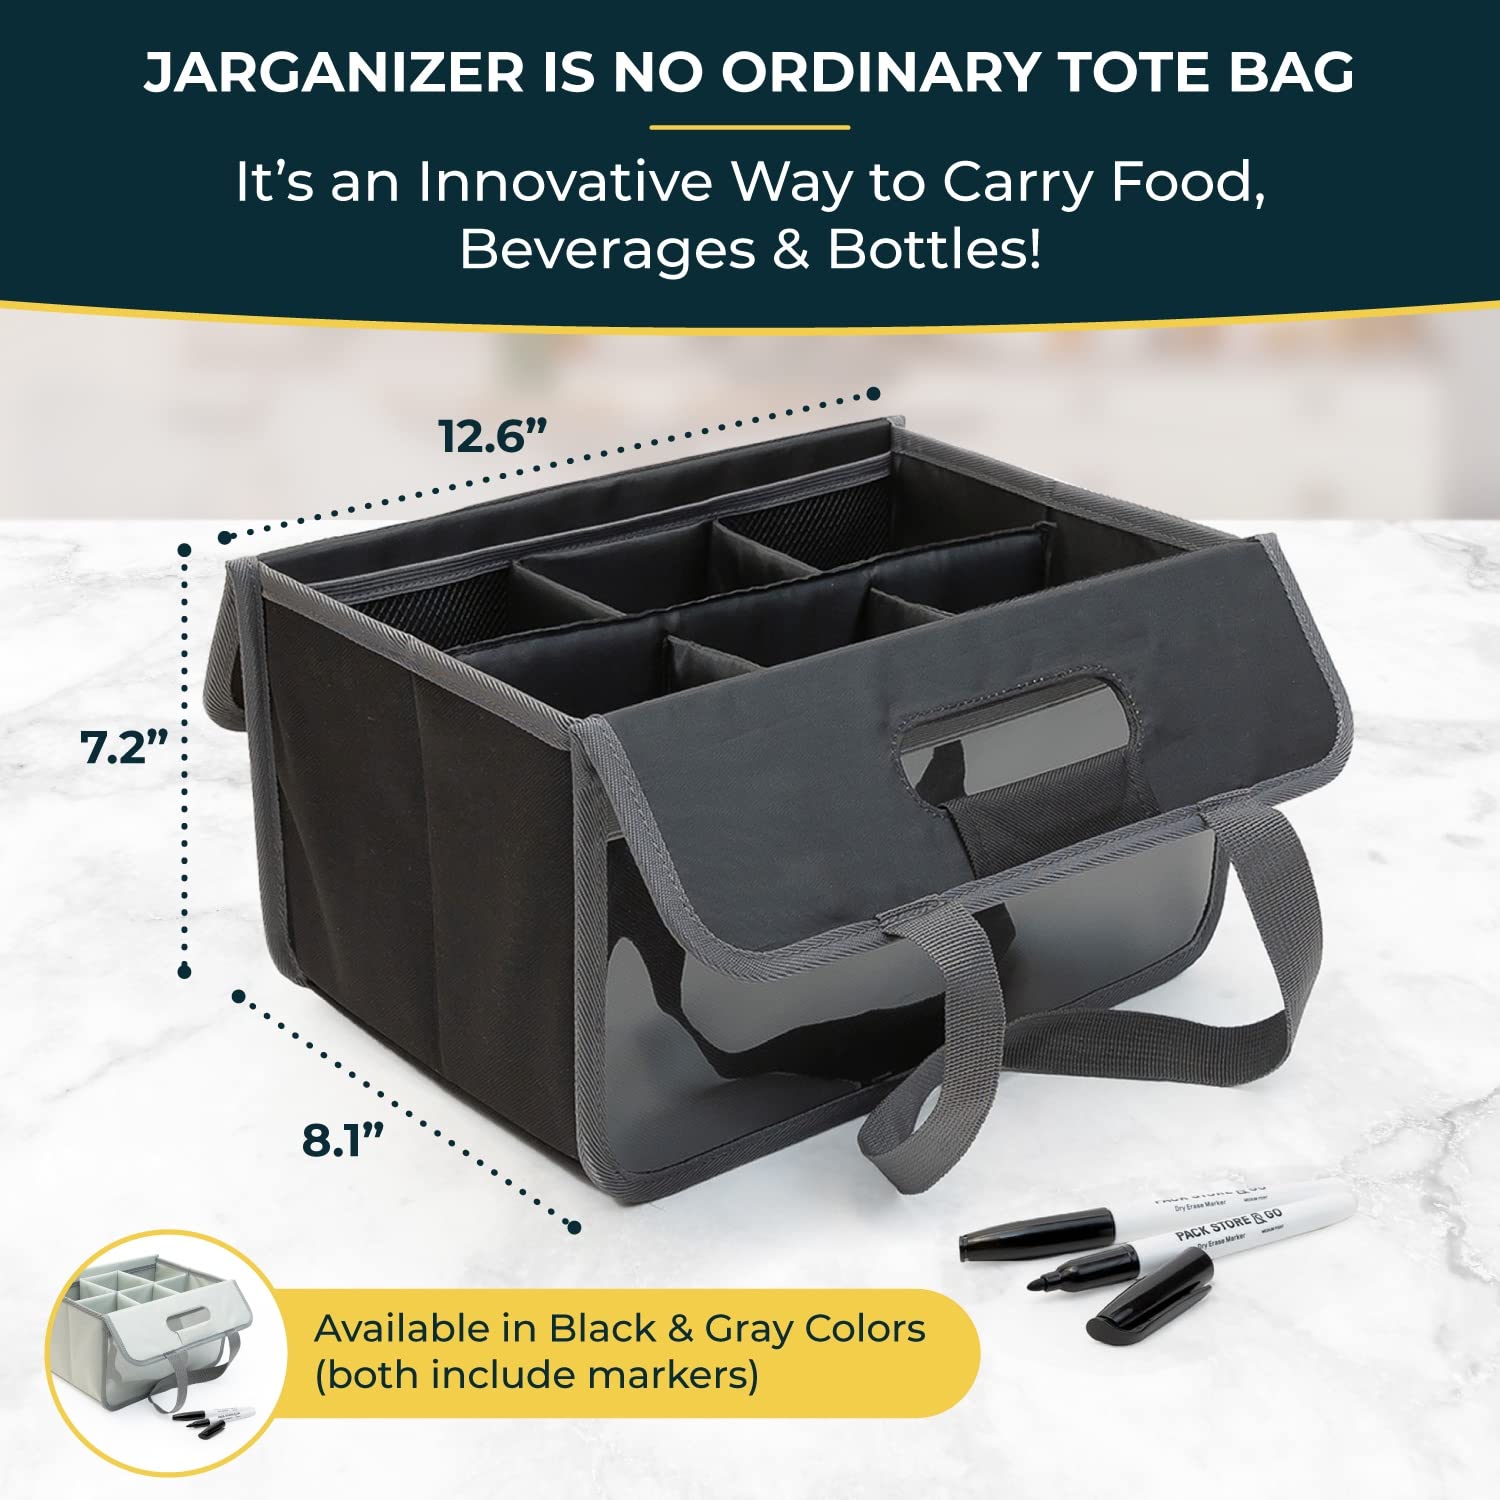 [2-Pack] Jar Organizer 6 Jar Protective Bag Carrier – Sturdy Foldable and Stackable Tote Bag with Handles, Removable Padded Divider for Securely Storing, Carrying Ball Canning Jars, Cups, Tumblers